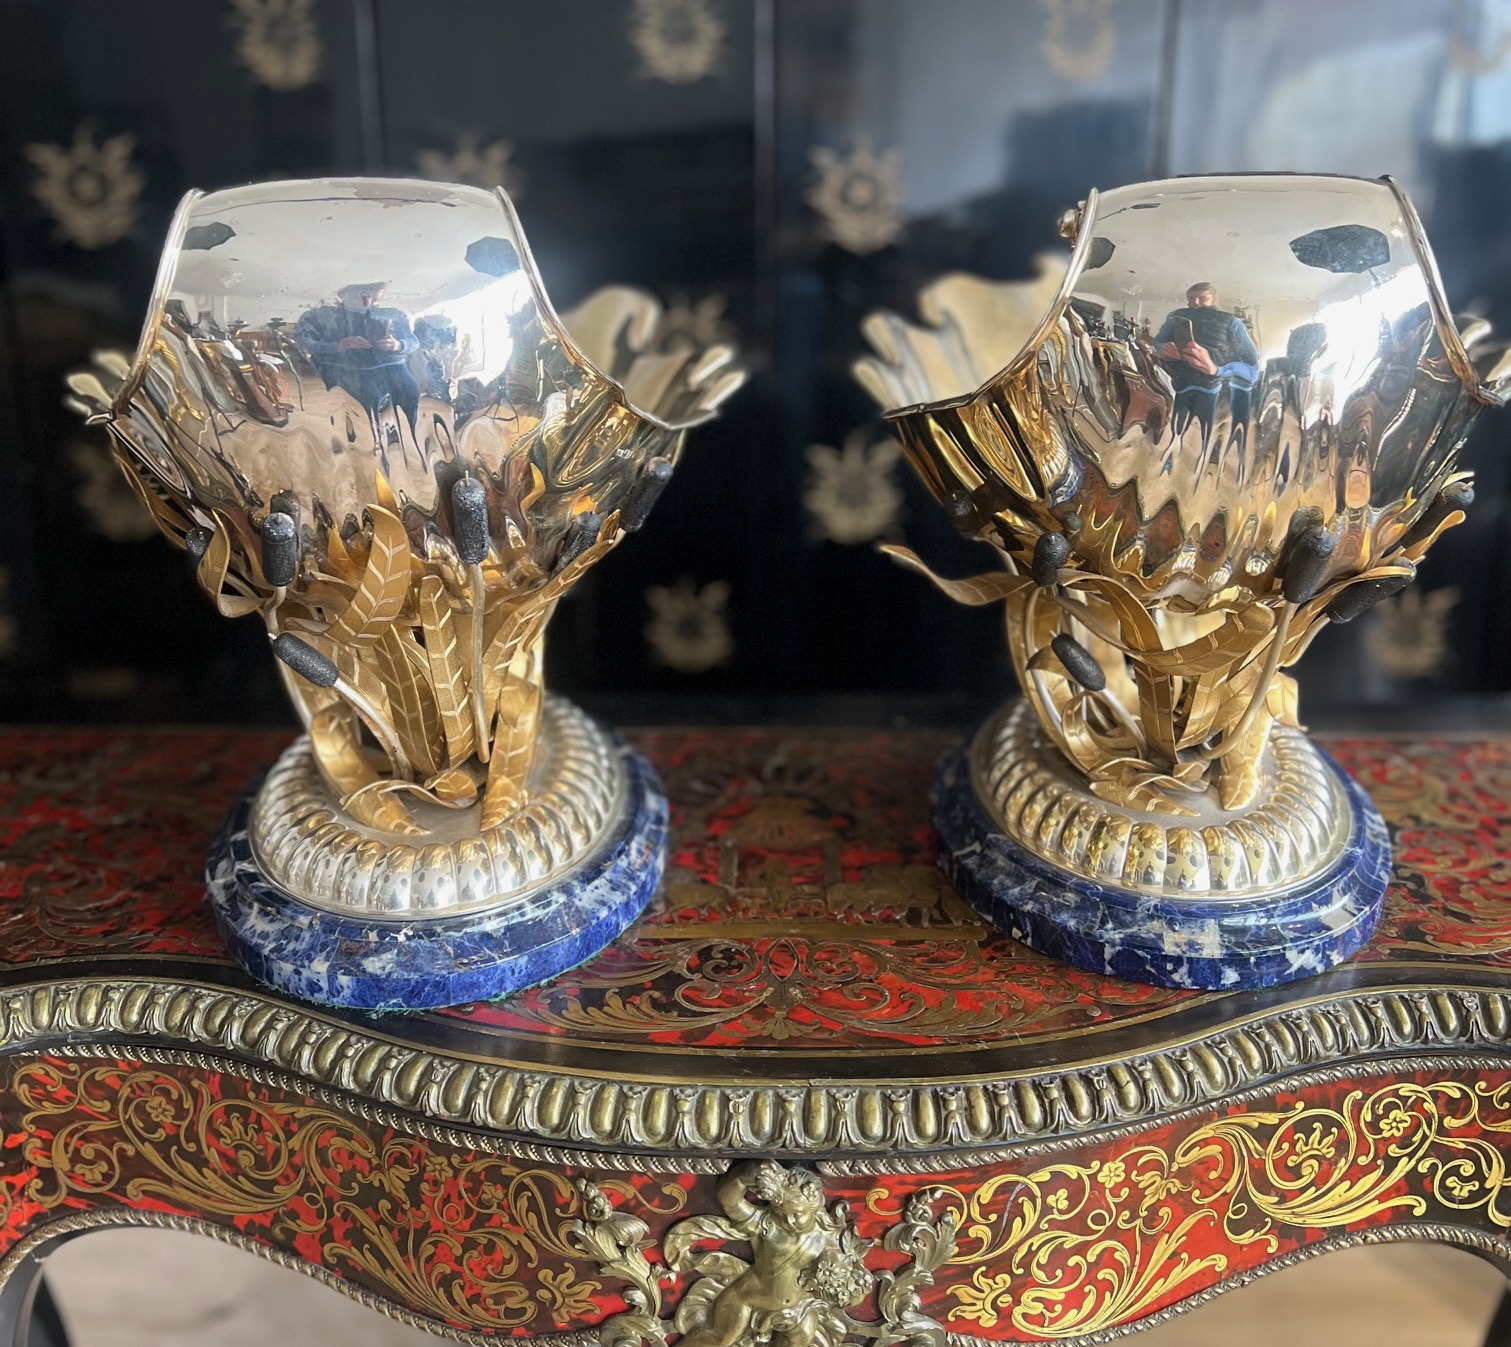 A LARGE PAIR OF STERLING SILVER, SILVER GILT AND LAPIS LAZULI WINE COOLERS BY MAPPIN & WEBB - Image 5 of 7